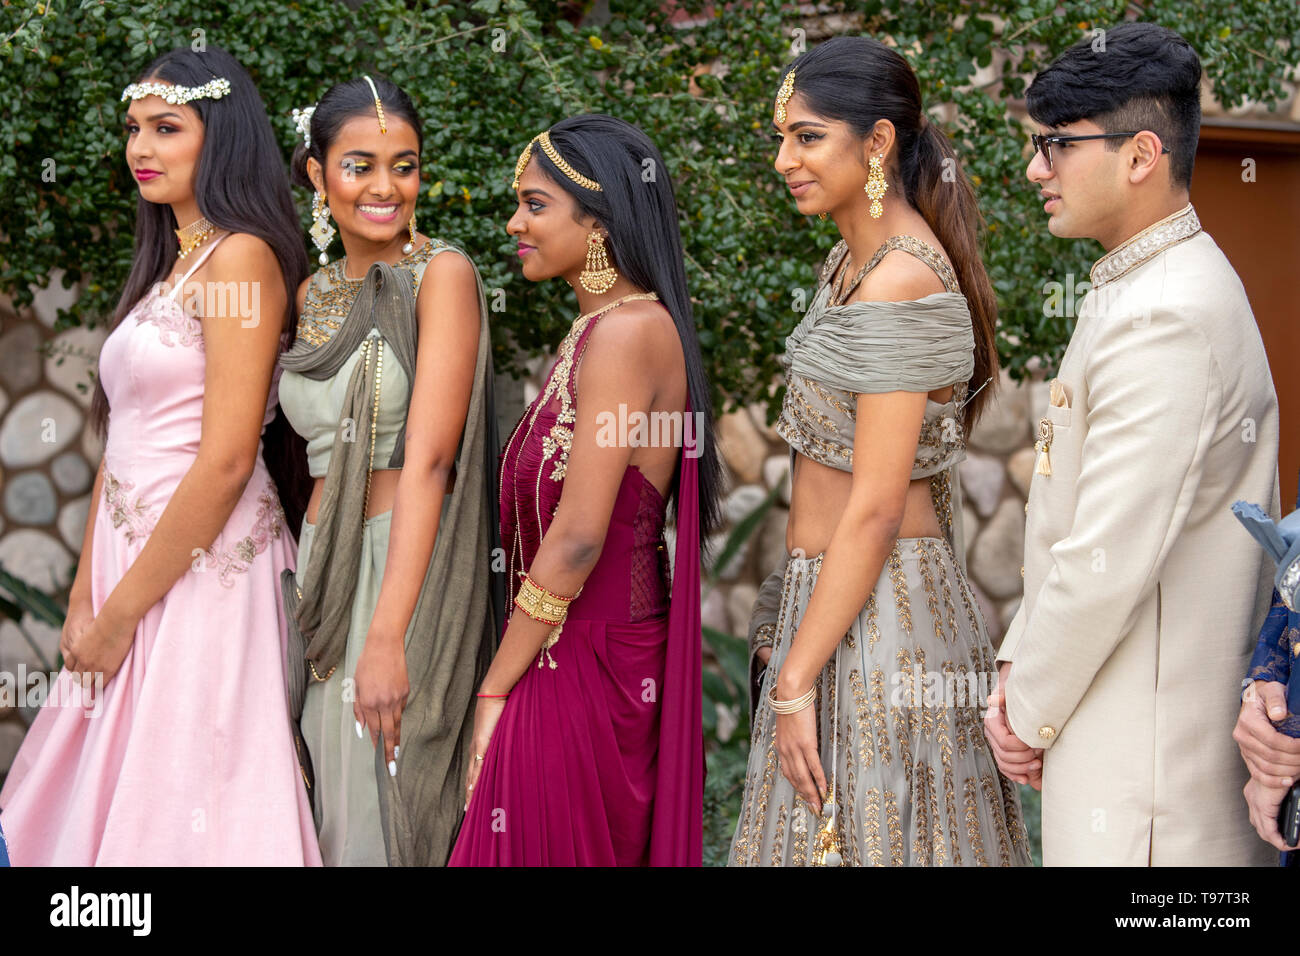 A bevy of models line up at a 'Bollywood' bridal fashion festival for wealthy Indian Americans in Garden Grove, CA. Stock Photo